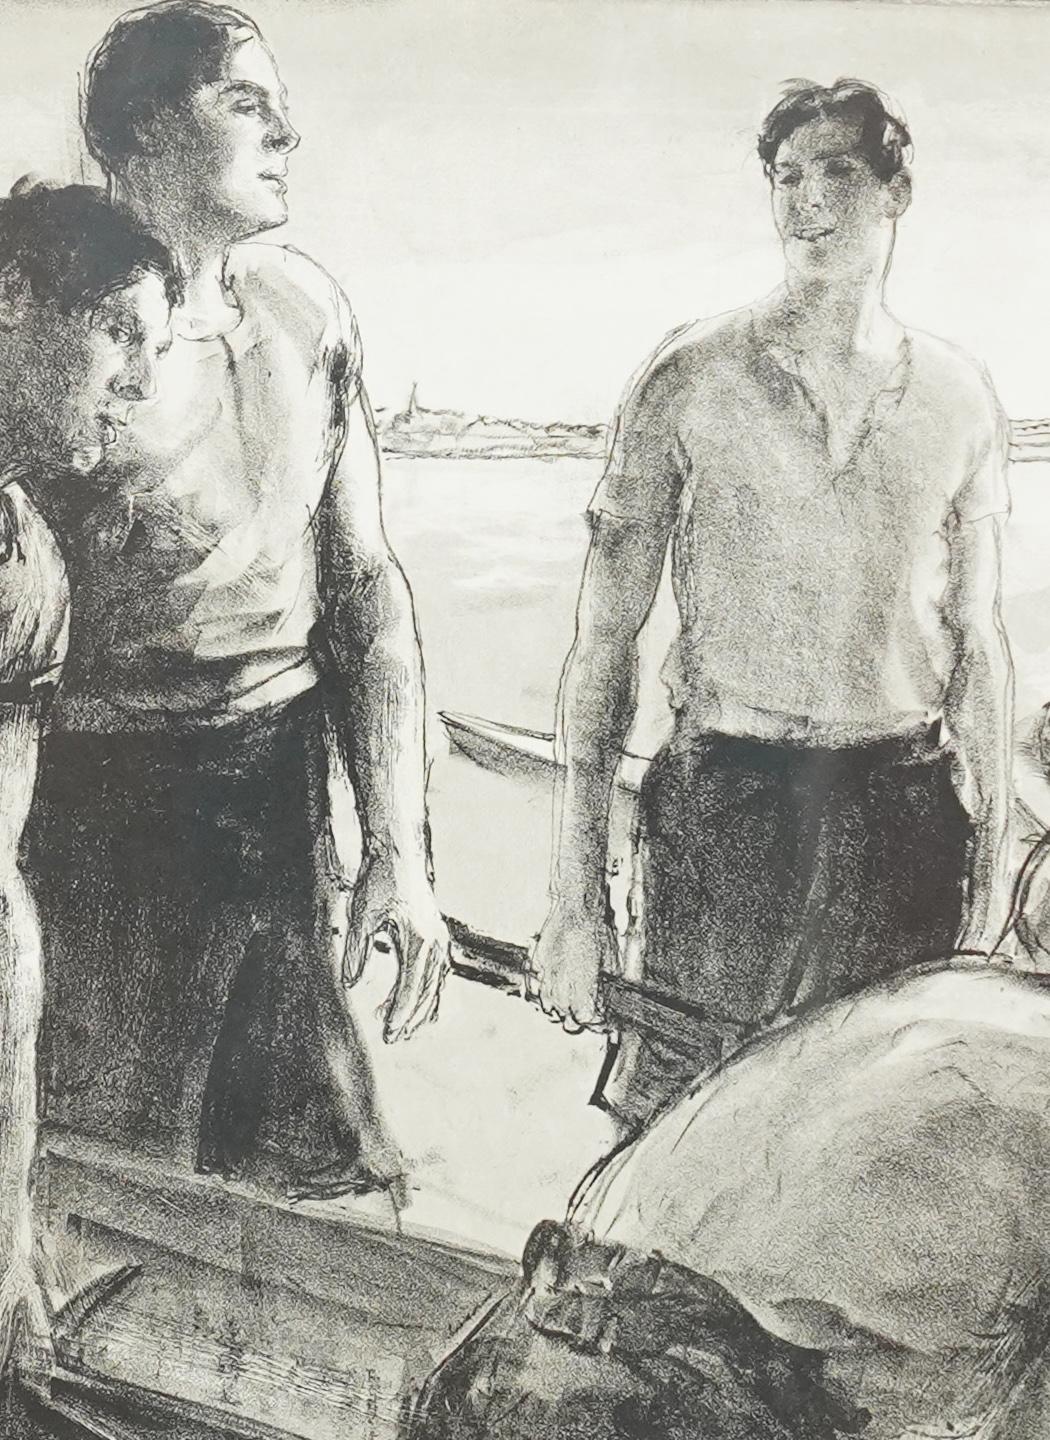 Rowers Before the Race - British 1930's art sport lithograph rowing For Sale 1